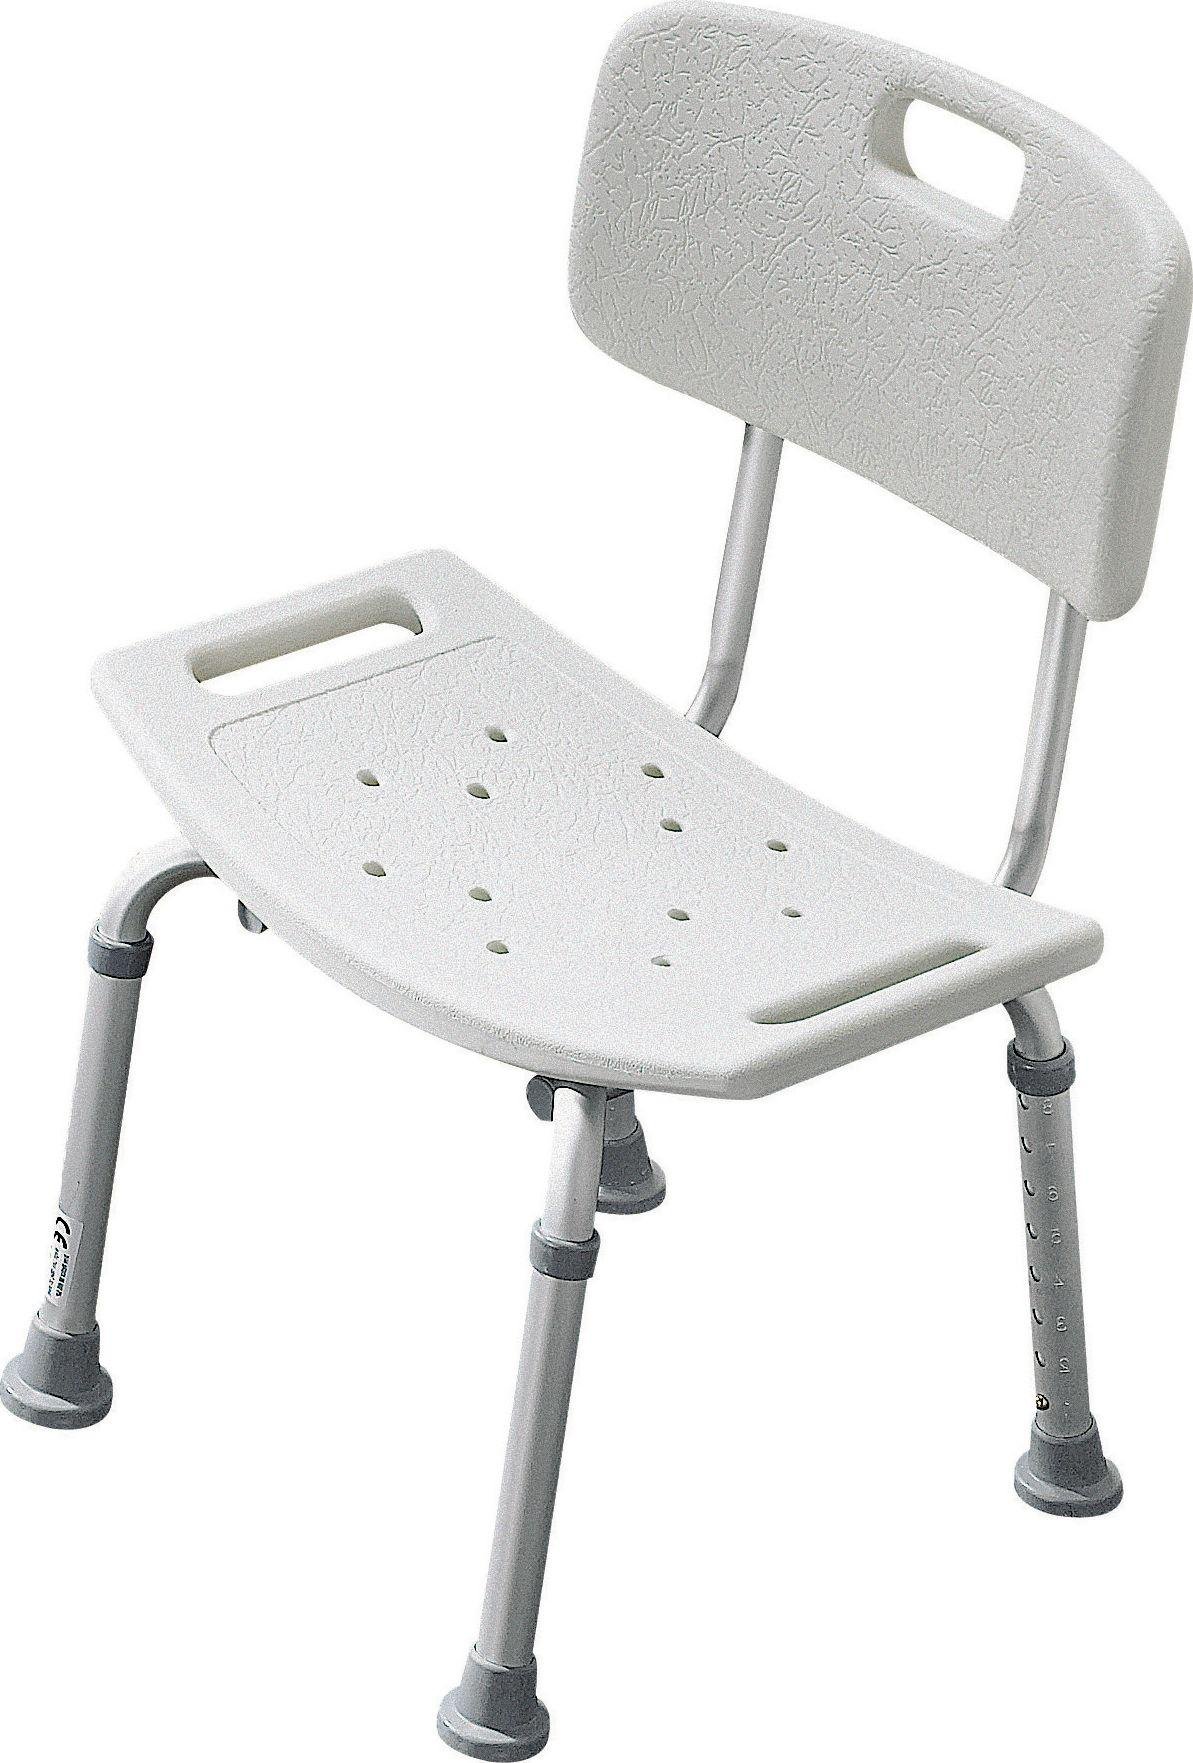 Shower Seat with Backrest Review